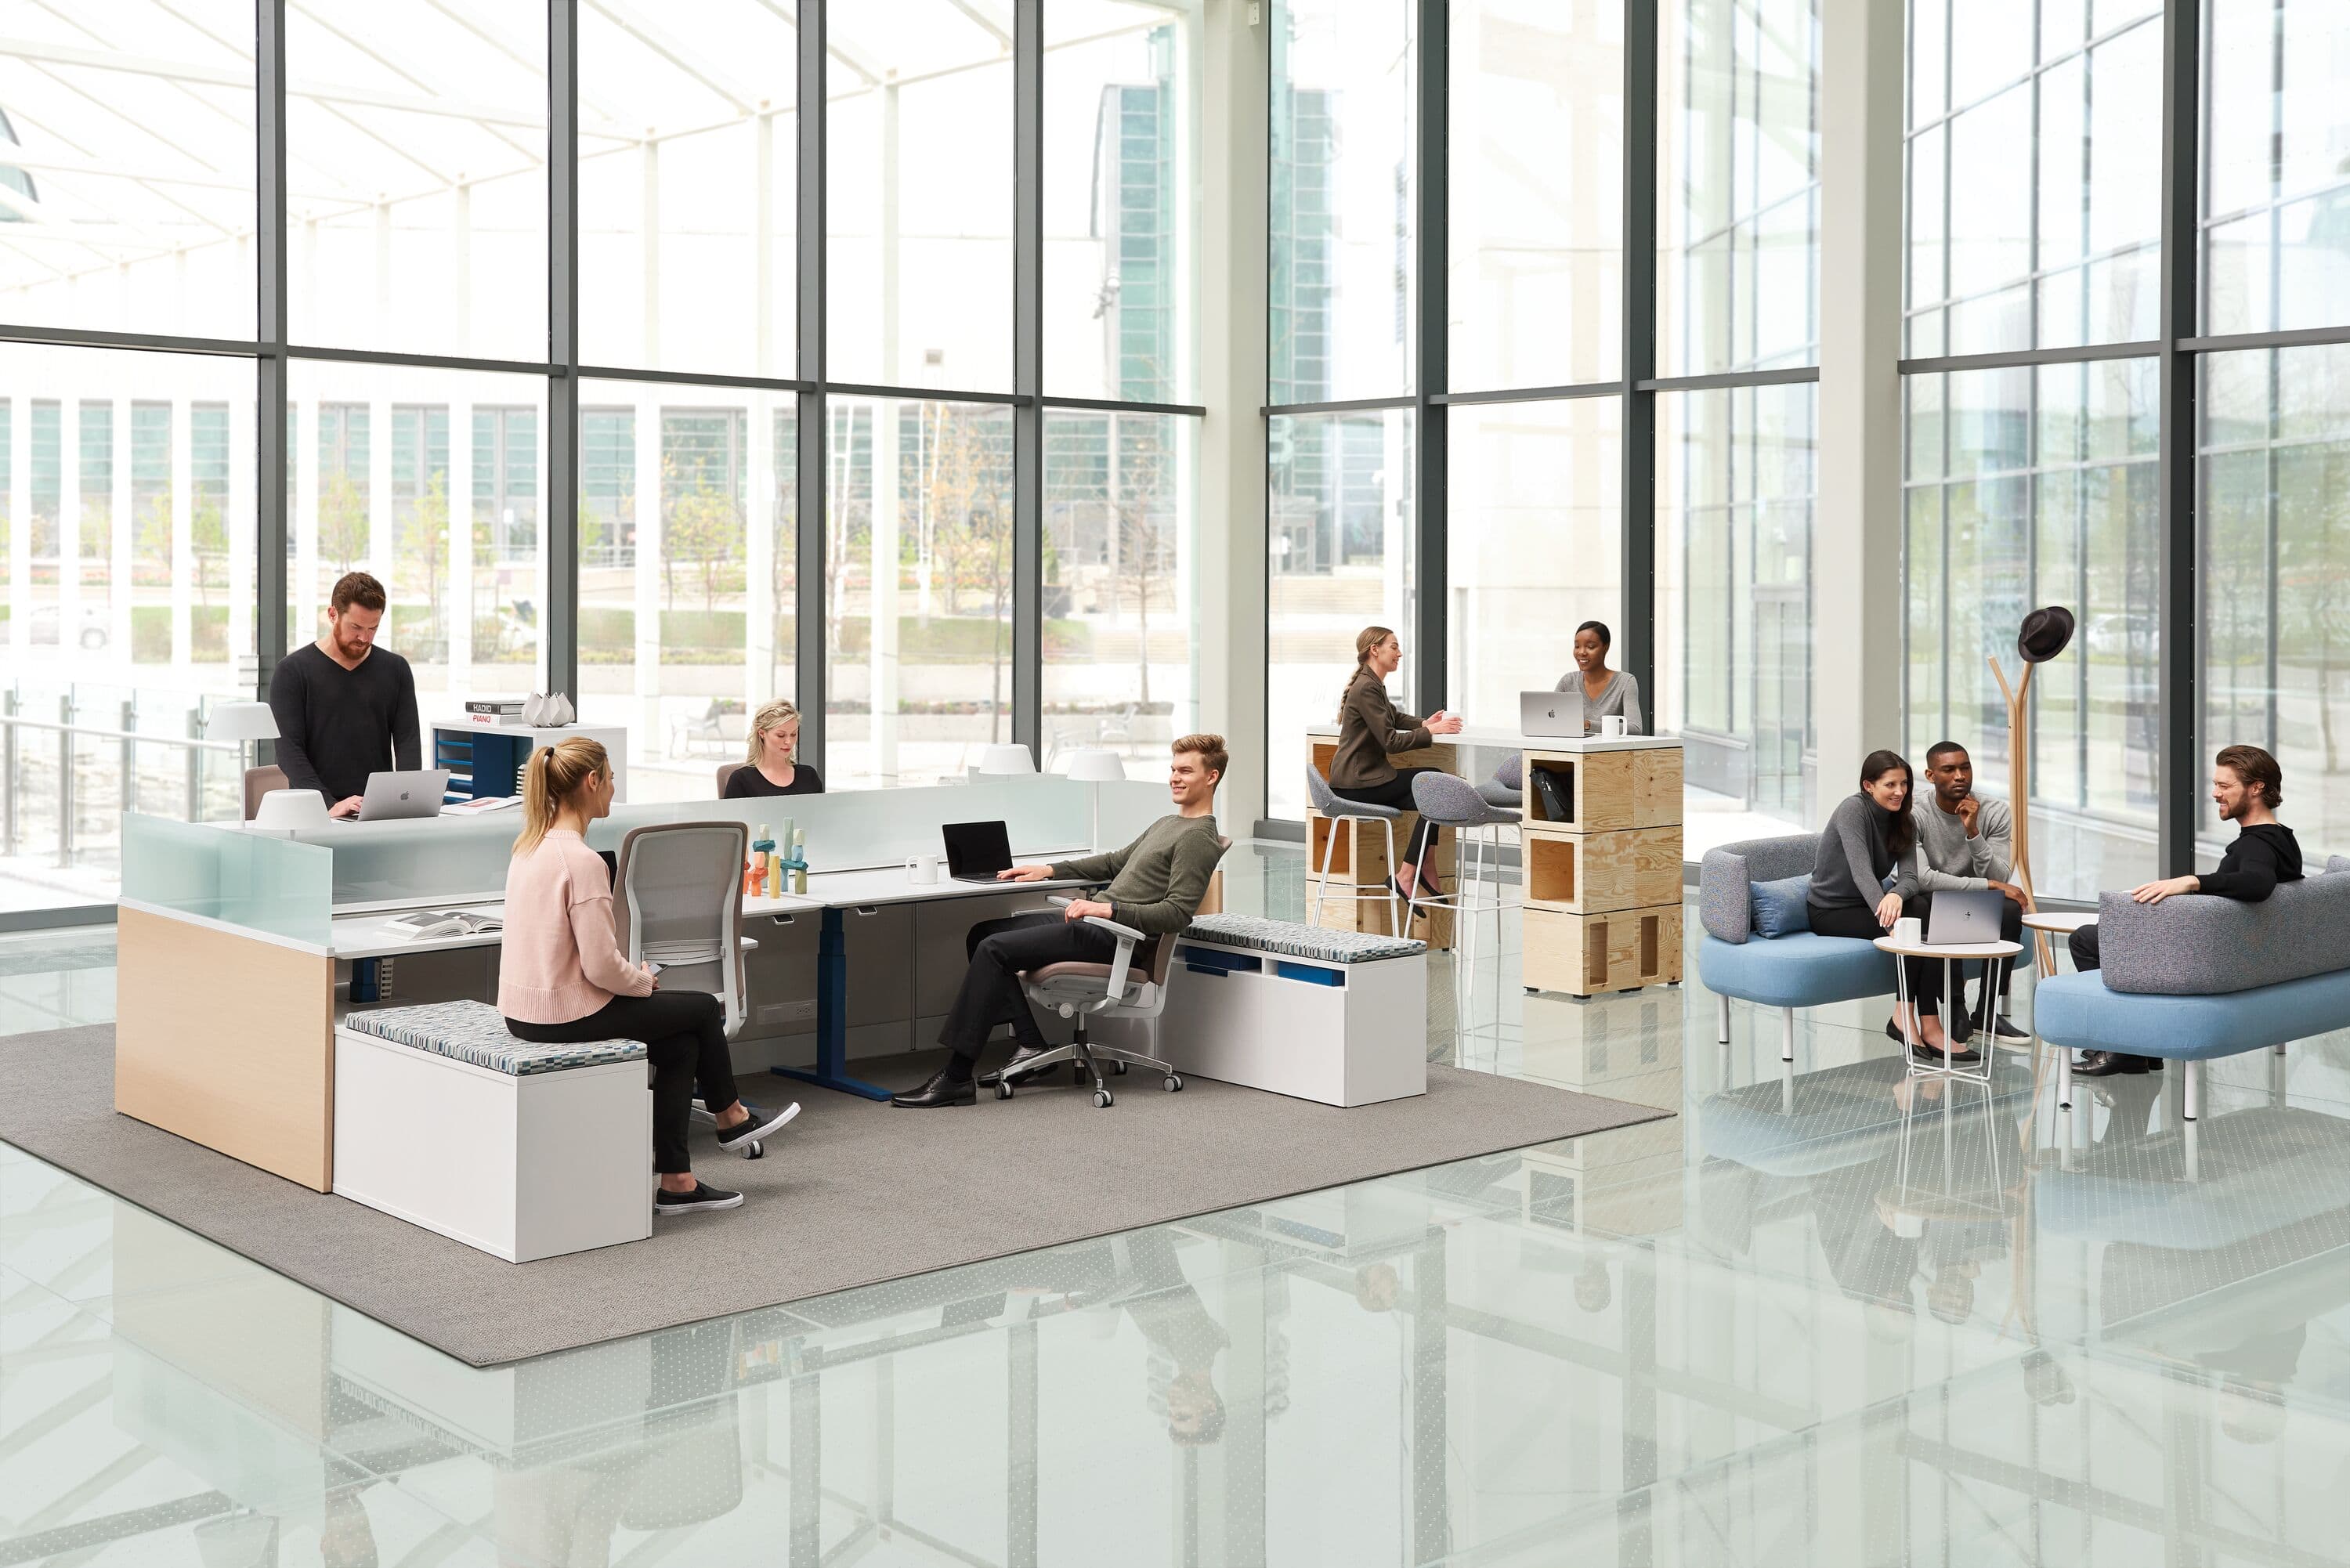 Leverage office furniture by Teknion